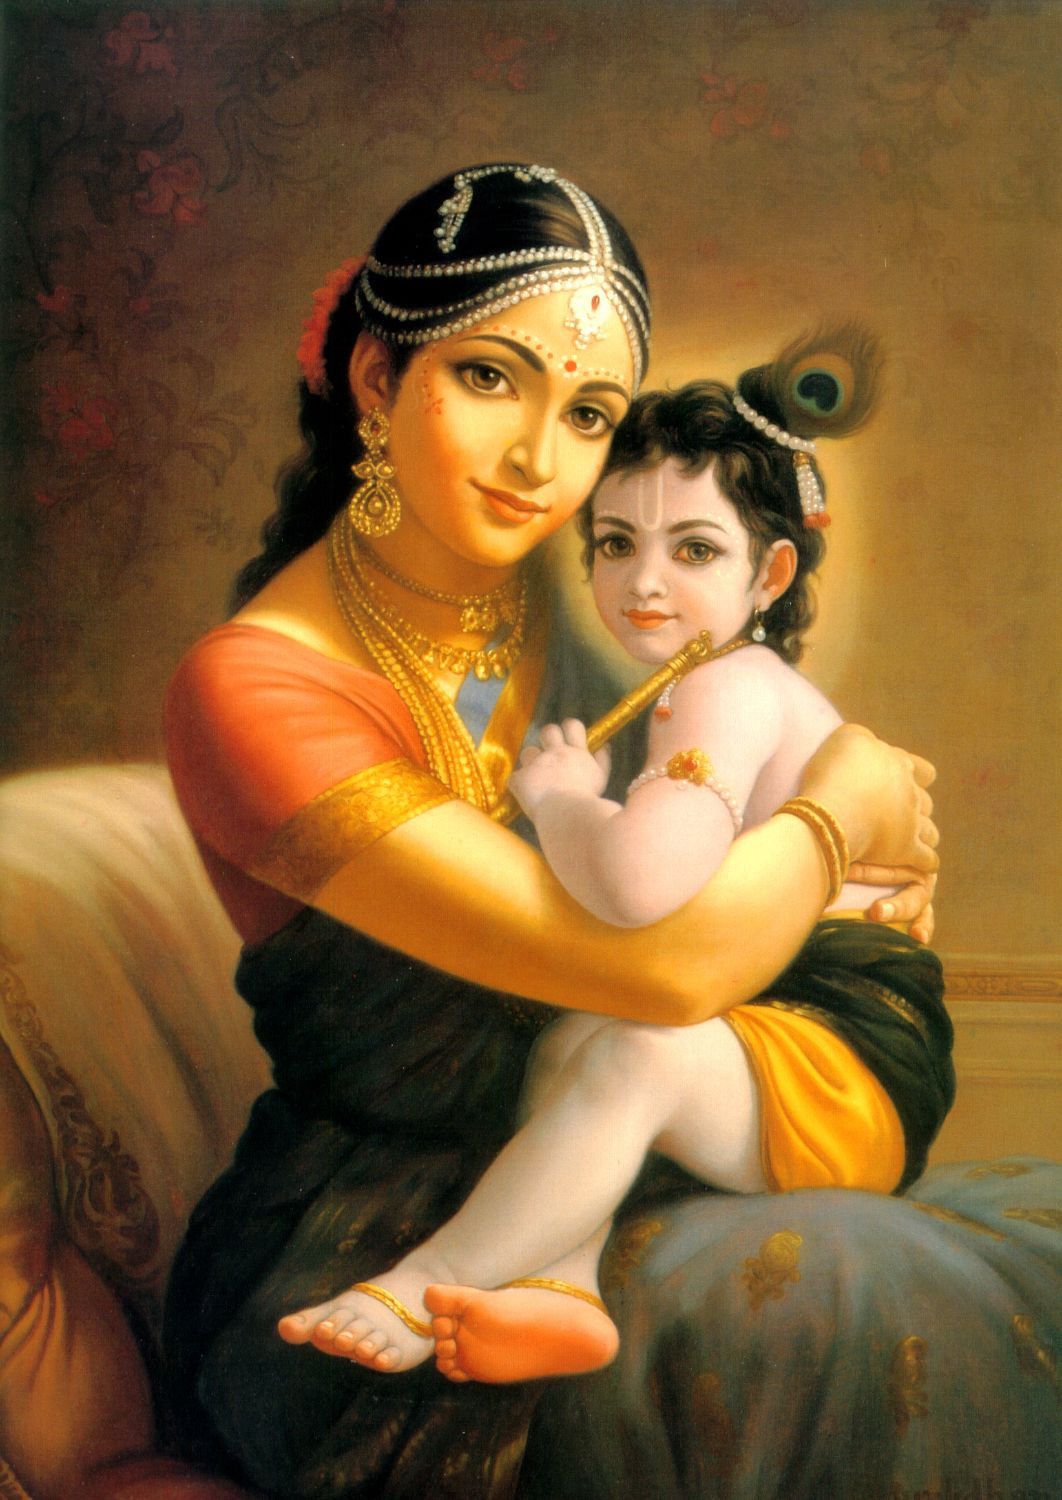 pictures of lord krishna with yashoda
